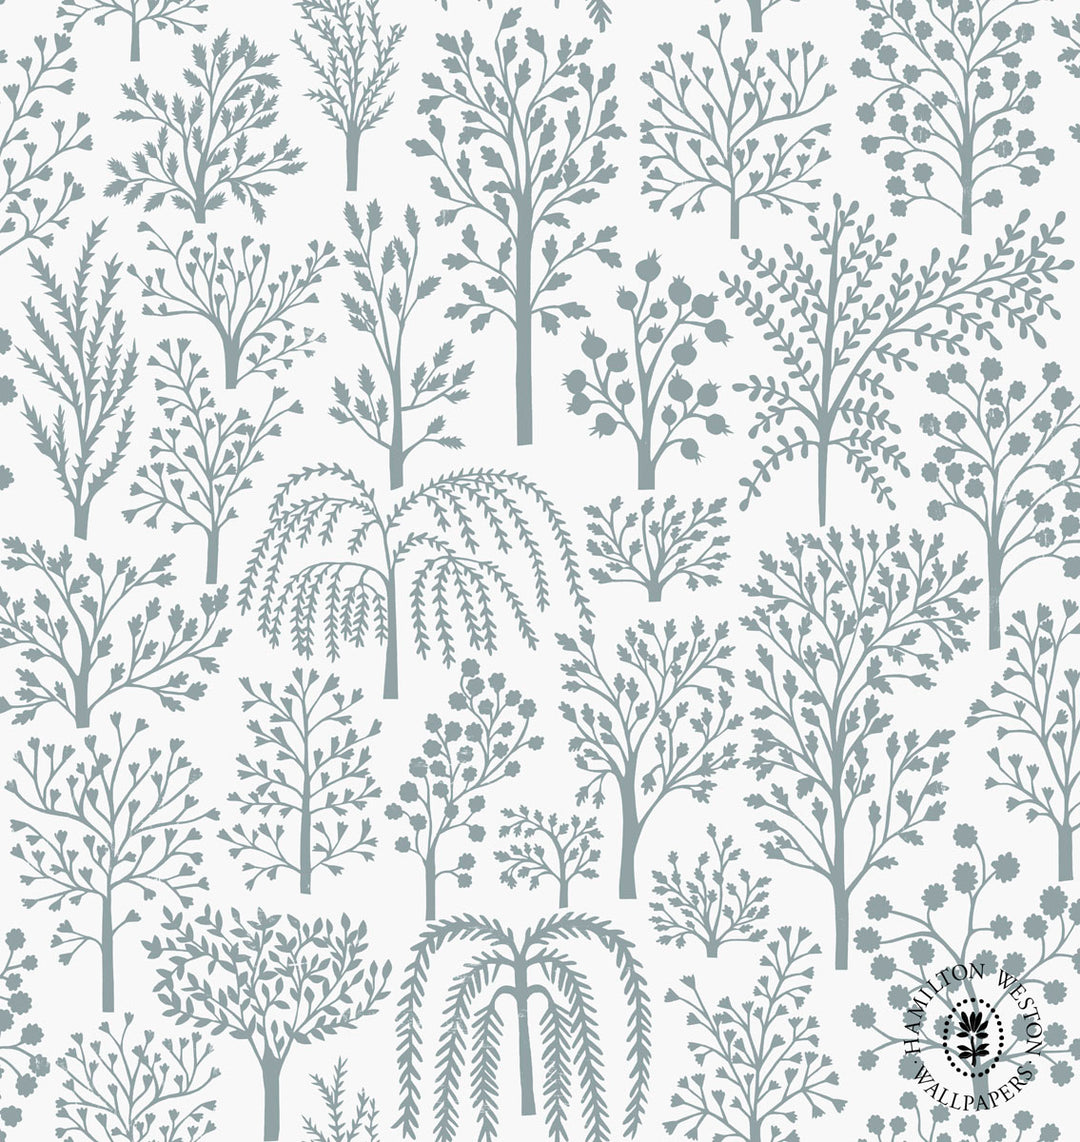 Hamilton-weston-wallpaper-Alice-Pattullo-Arboretum-hand-paper-cutting-Pigeon-on-chalk-APARB04-traditional-stlye-pattern-country-trees